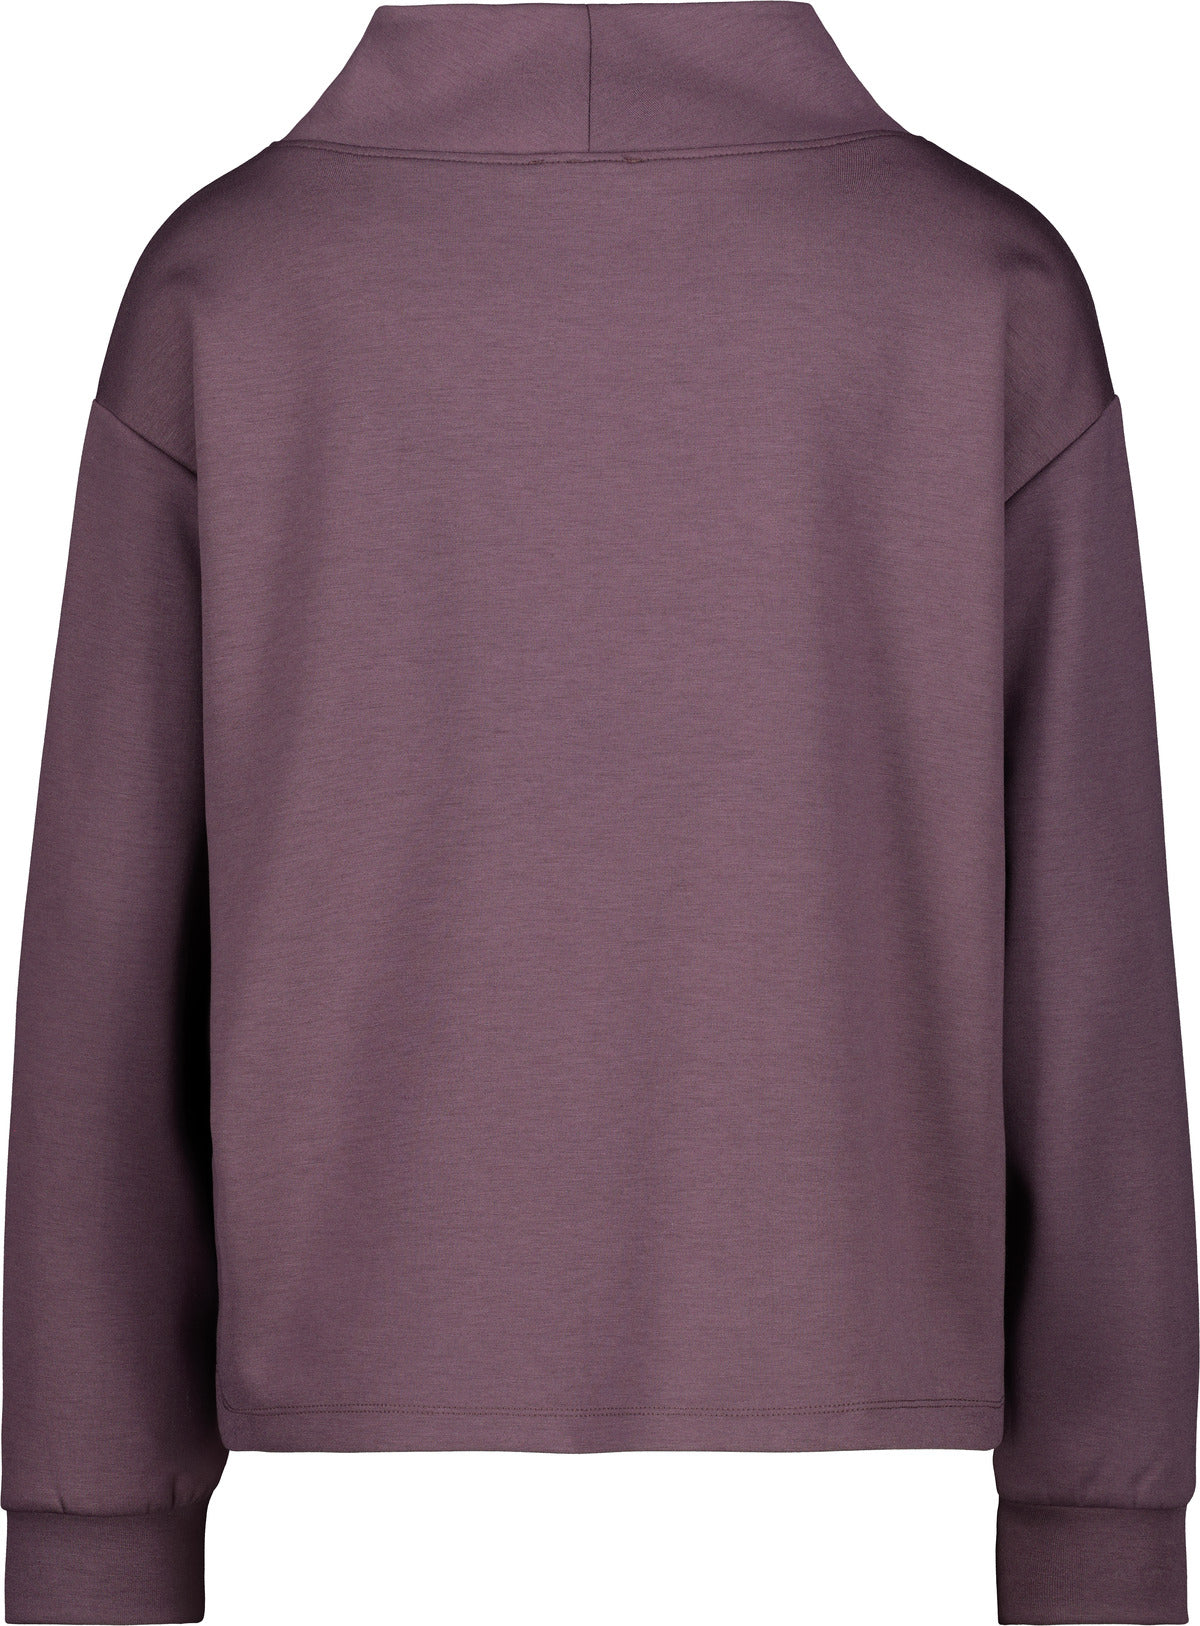 Pullover, lilac